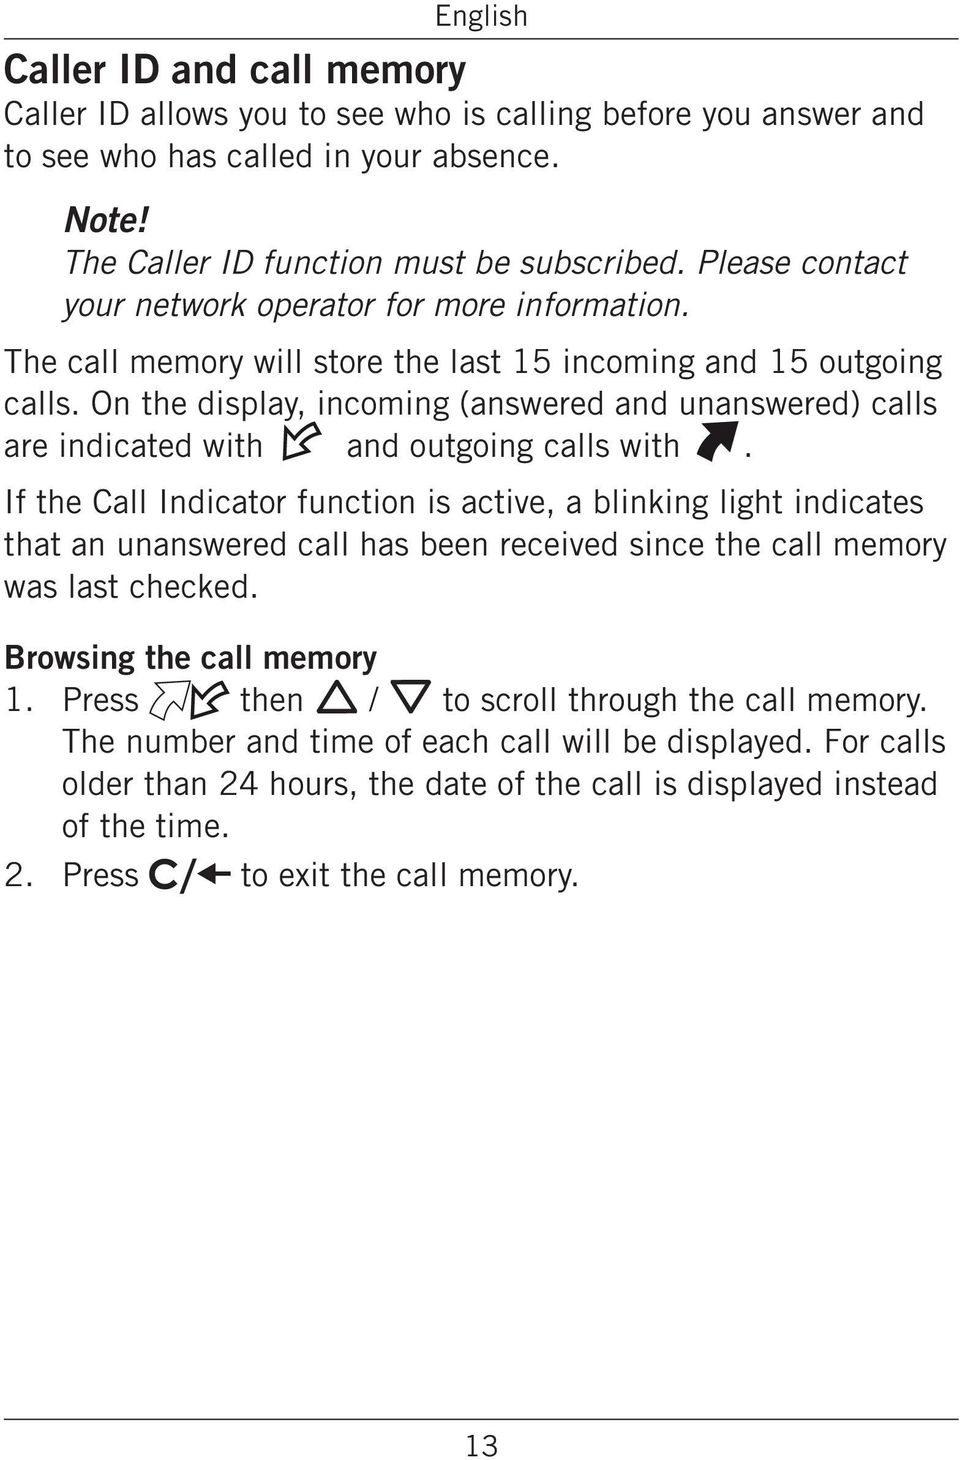 (answered and unanswered) calls are indicated with and outgoing calls with If the Call Indicator function is active, a blinking light indicates that an unanswered call has been received since the